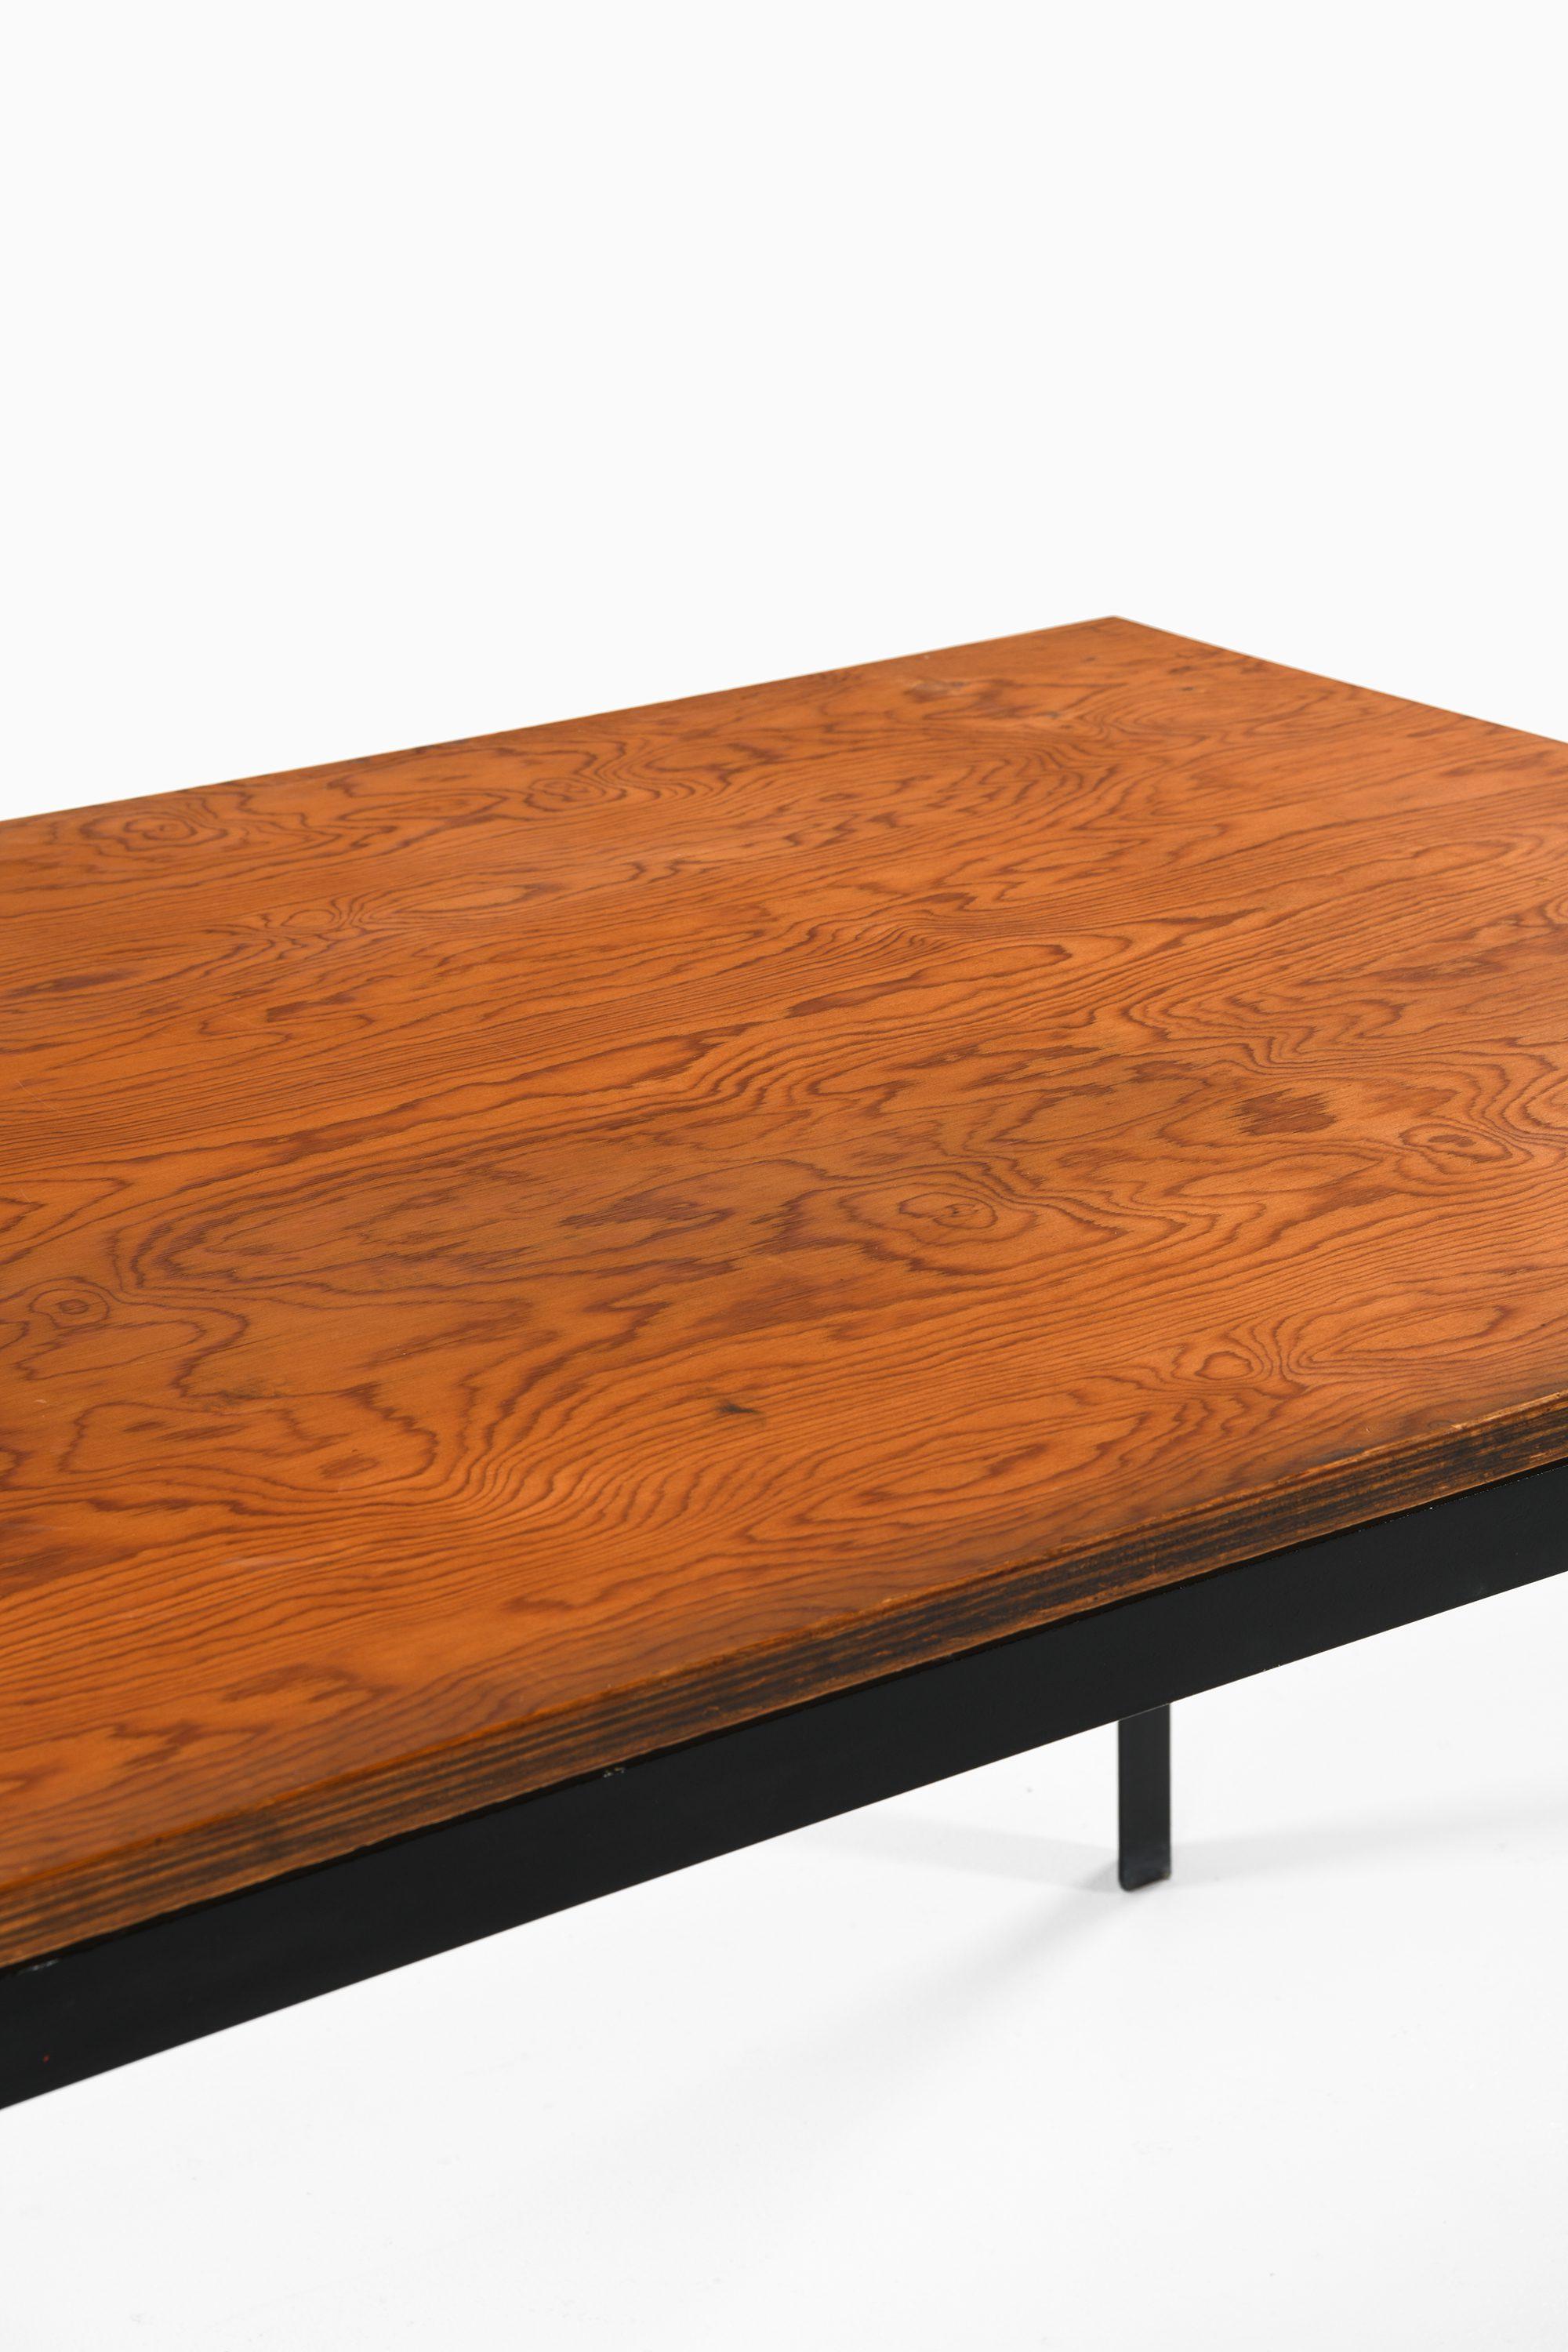 Danish Academy Table in Black Lacquered Steel and Pine by Poul Kjærholm, 1950's For Sale